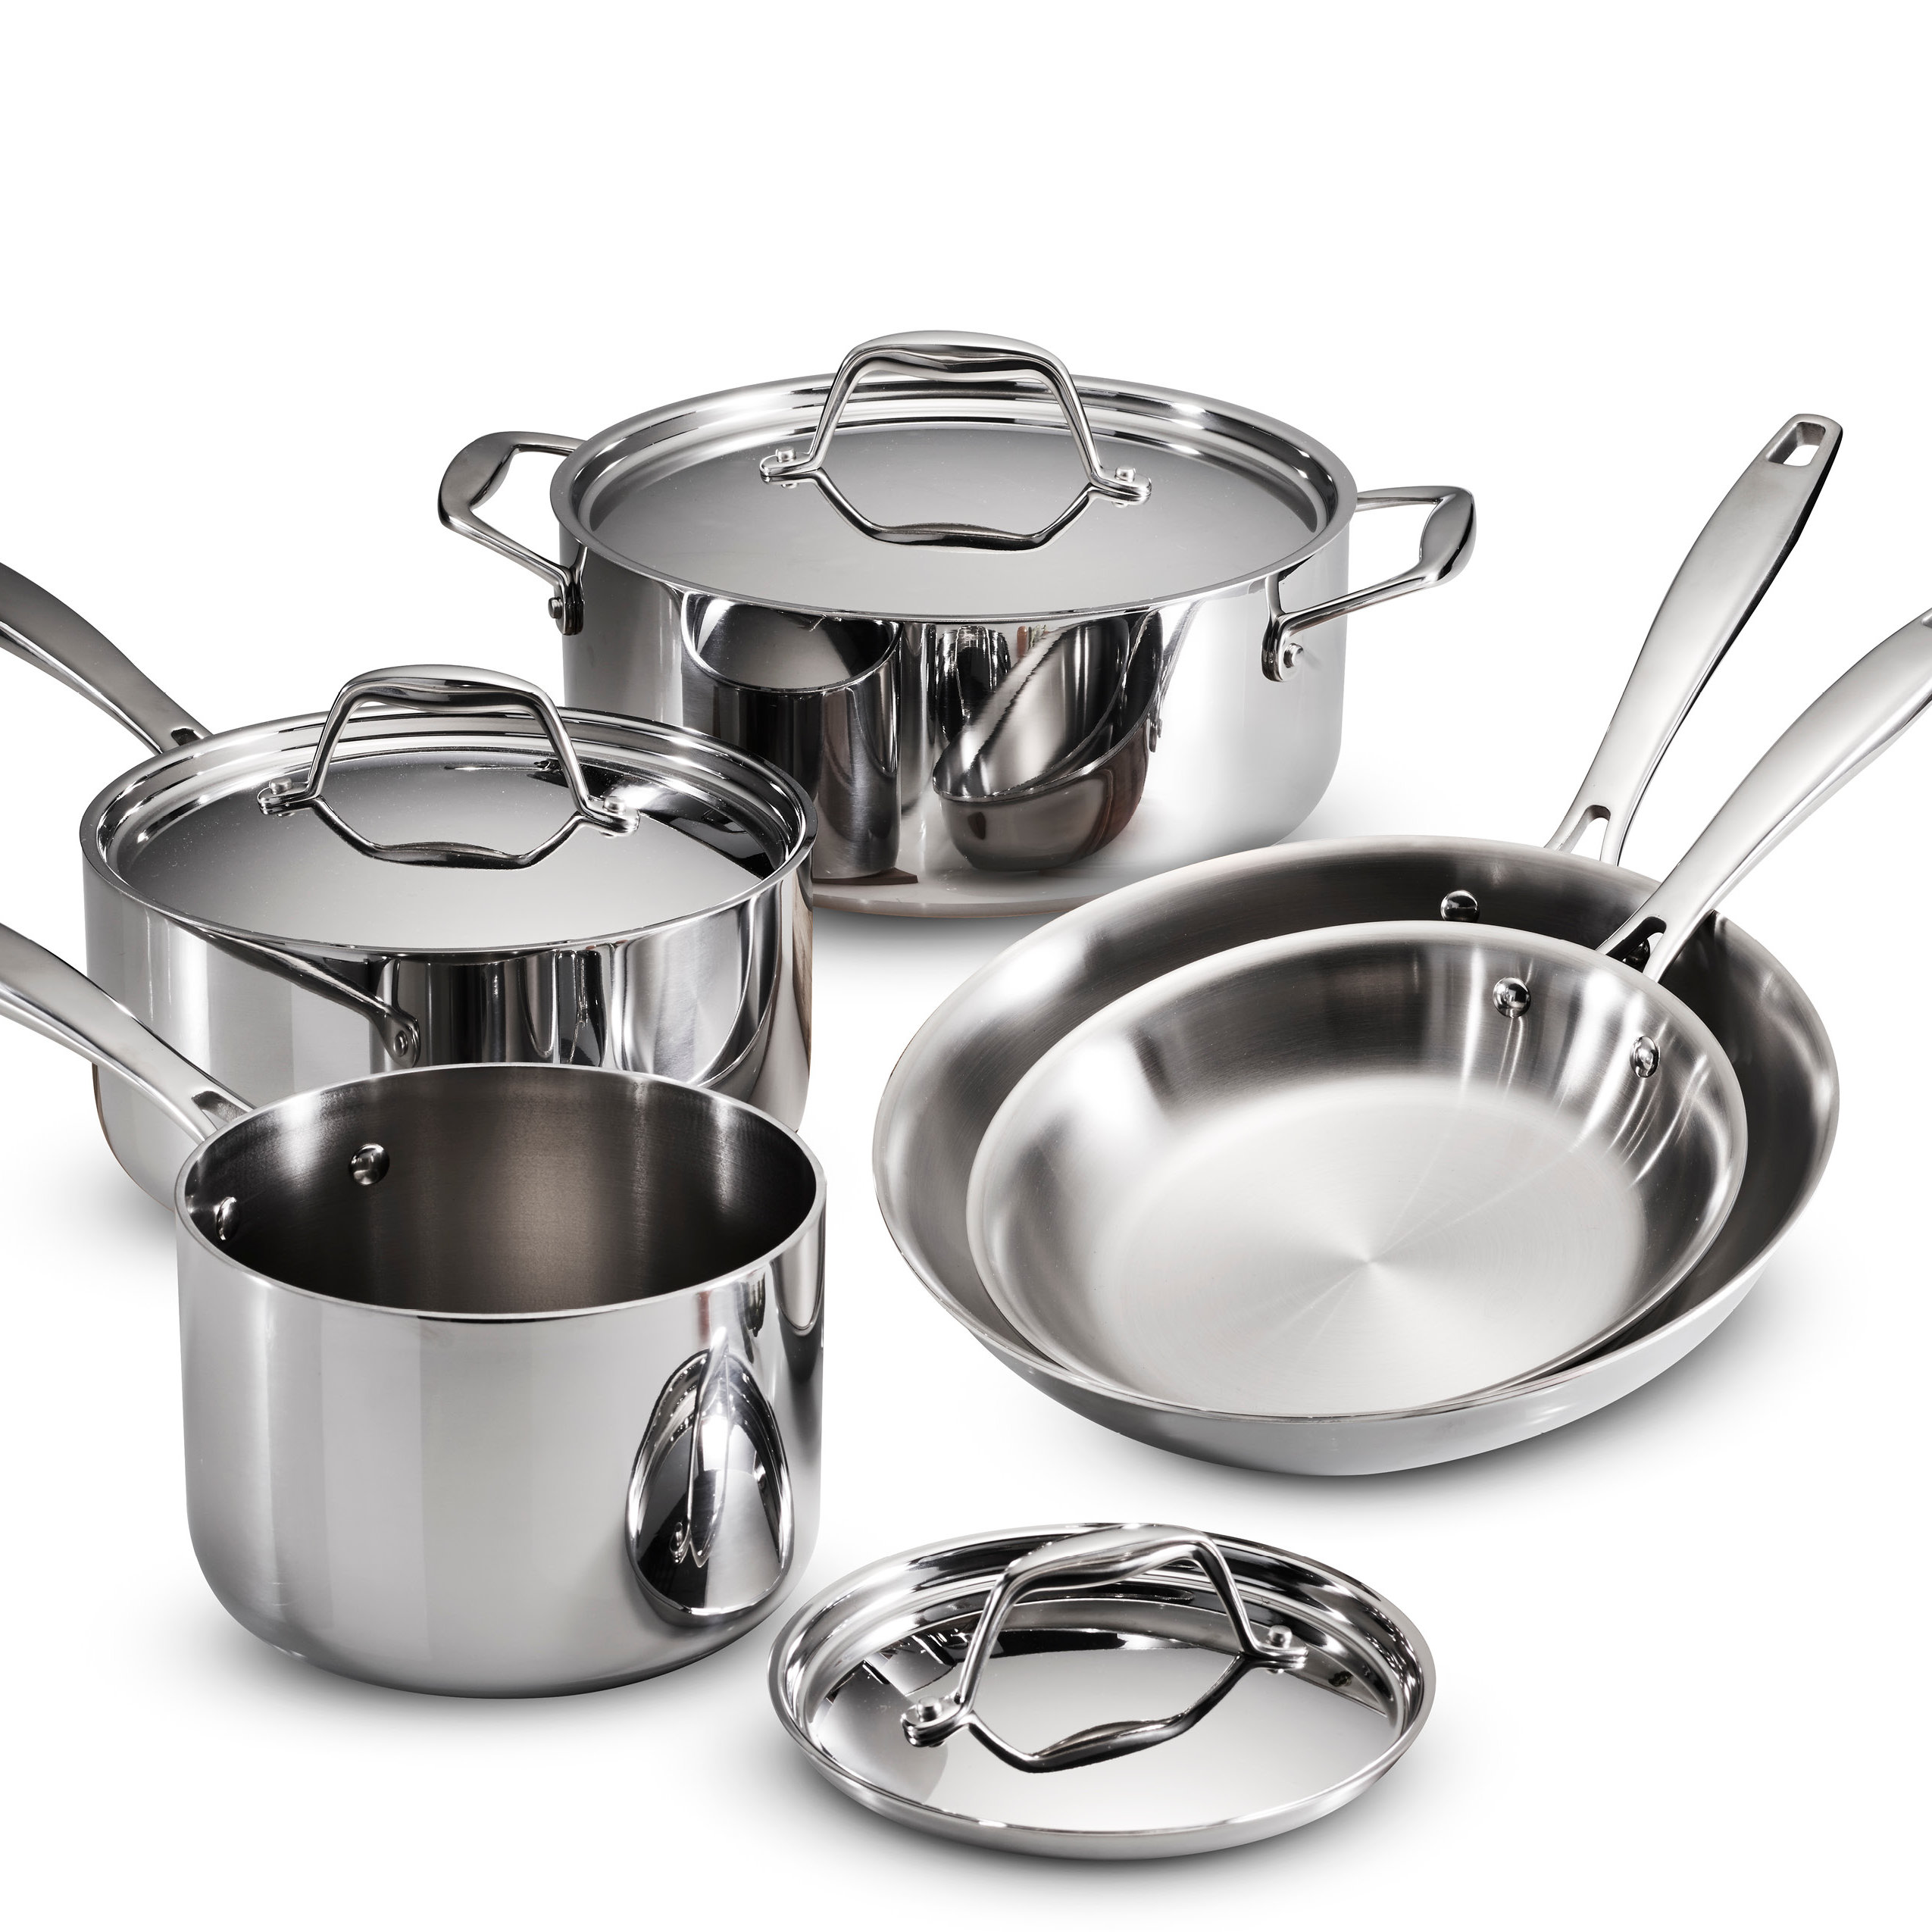 Tramontina Gourmet 12 Piece Tri-Ply Clad Stainless Steel Cookware Set NEW 